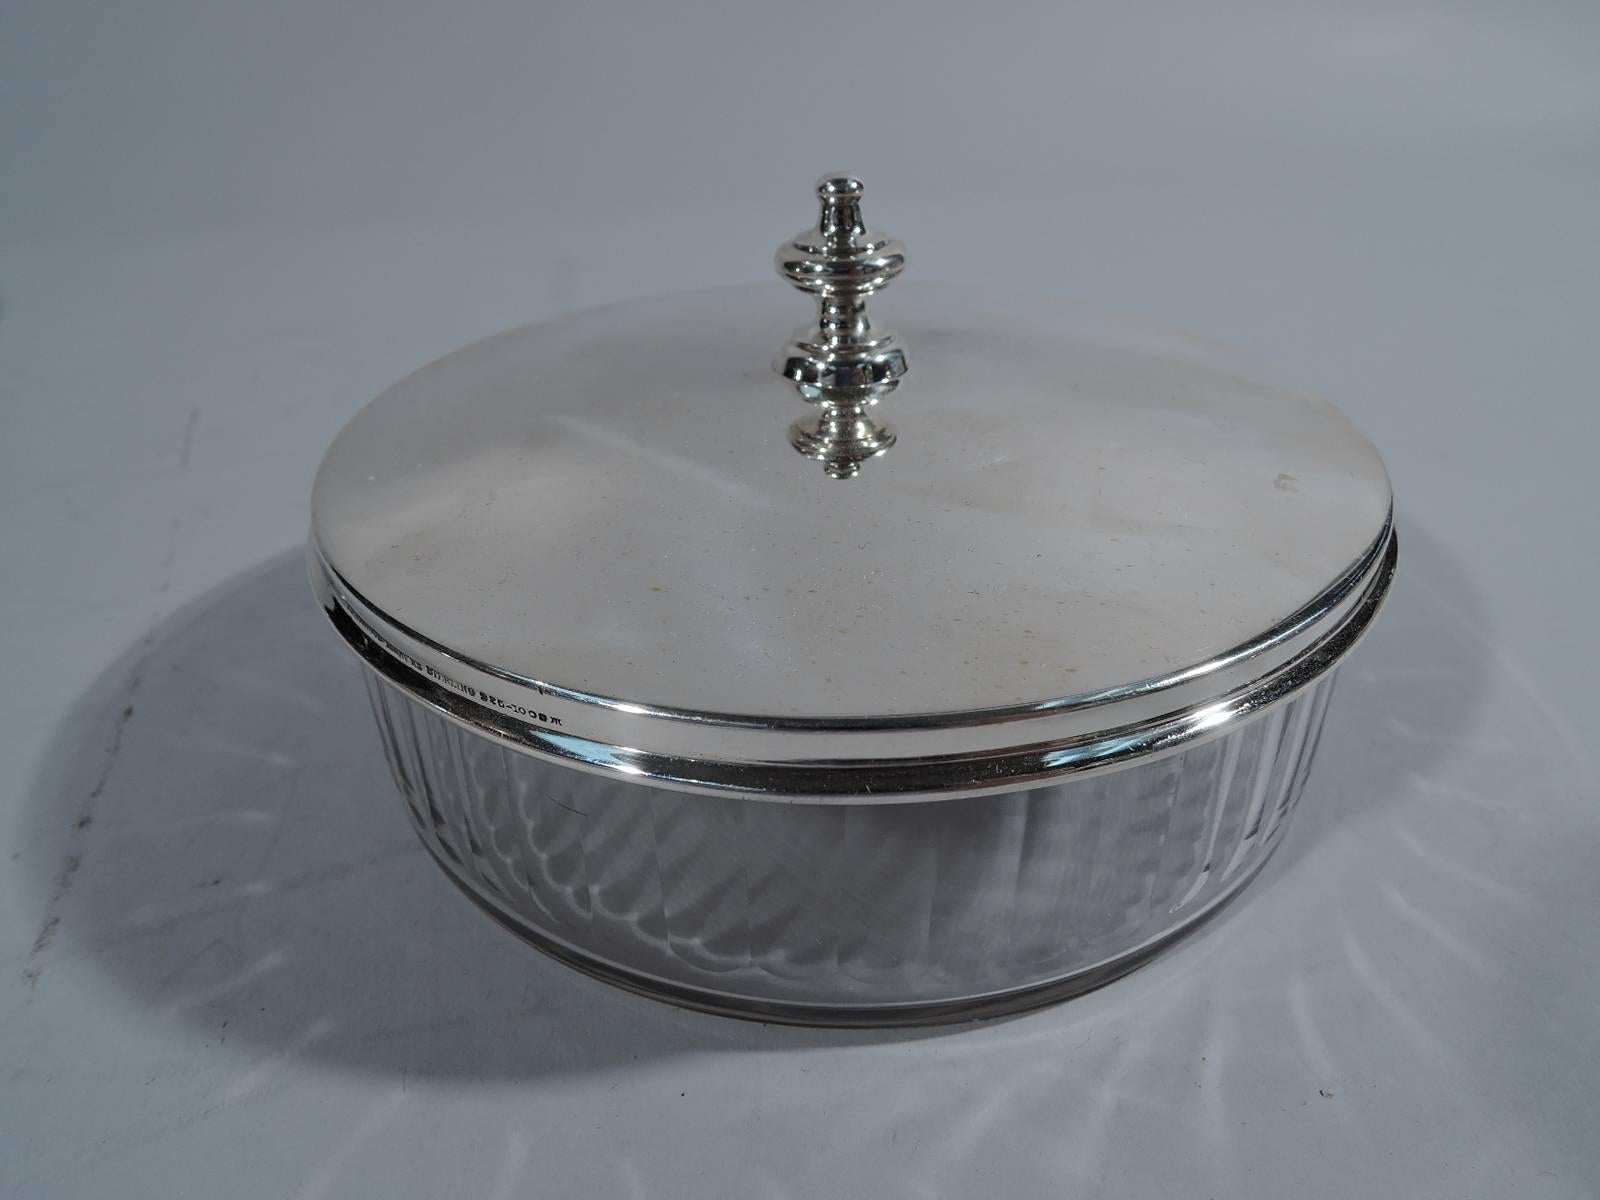 Edwardian Antique Tiffany Sterling Silver and Glass Caviar Serving Dish on Plate